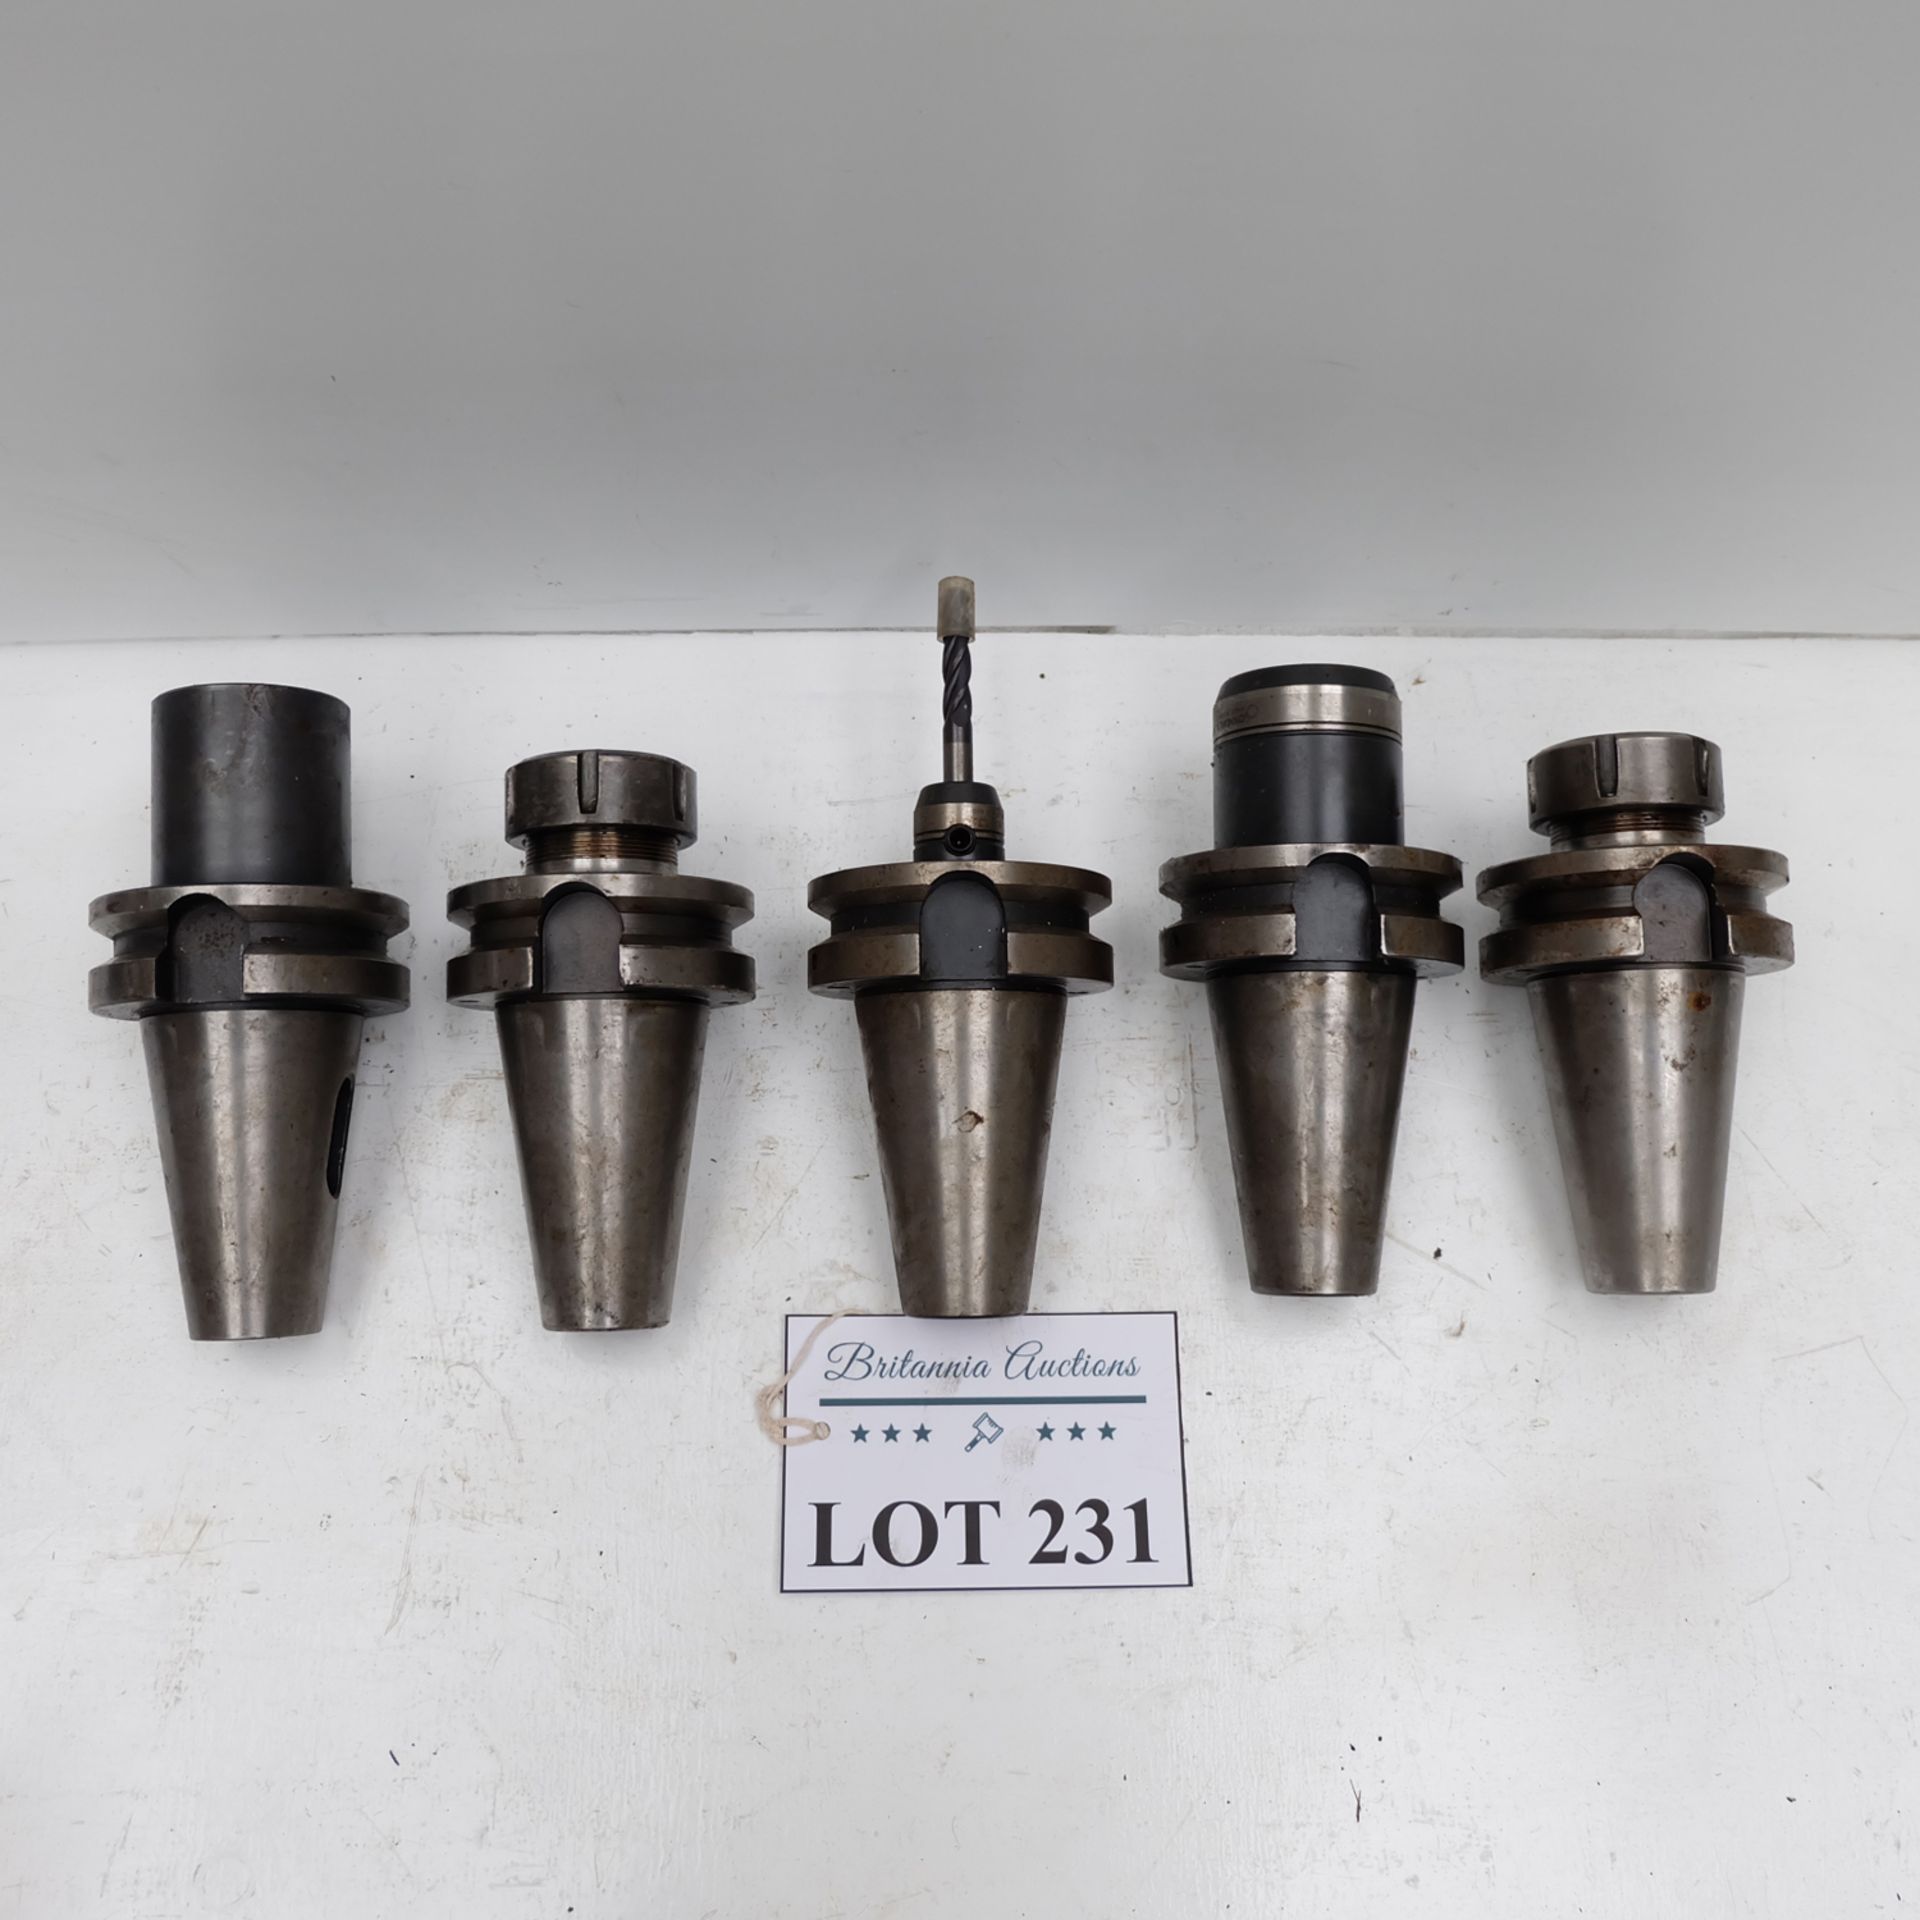 Quantity of 5 x BT 50 Spindle Tooling.